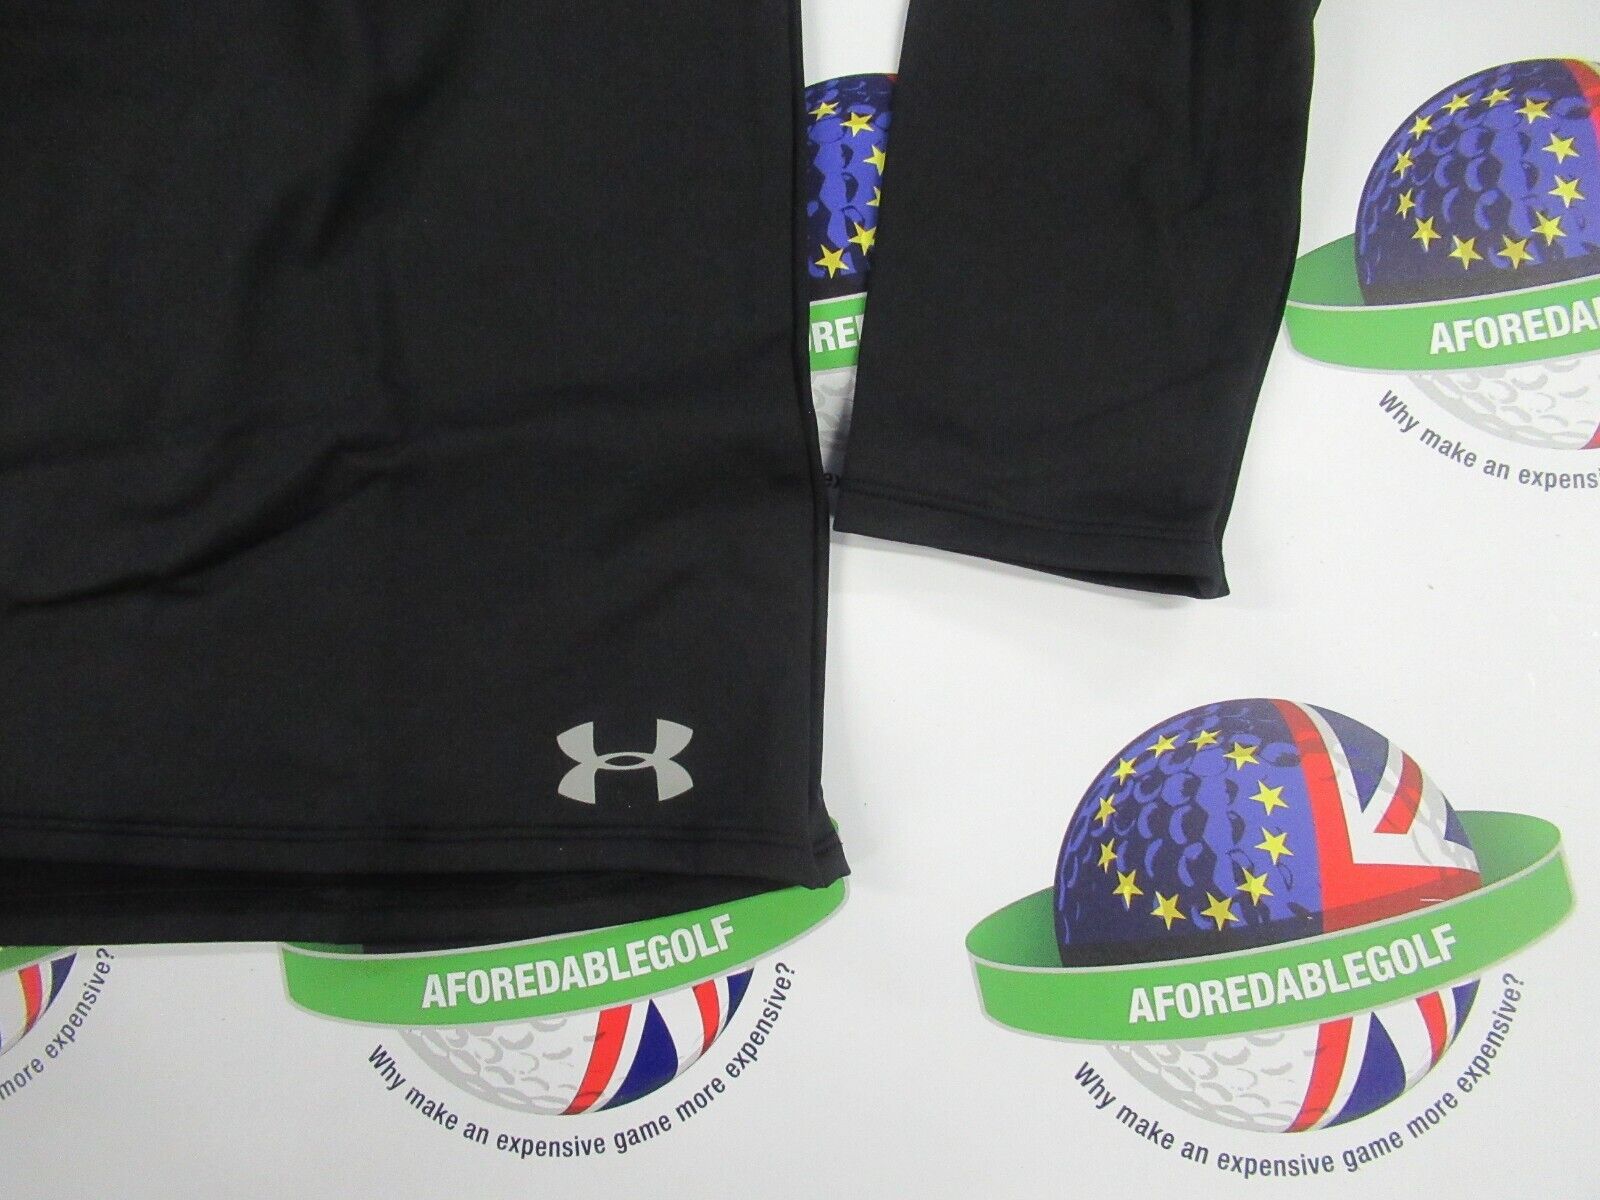 Under Armour ColdGear® Armour Fitted Mock